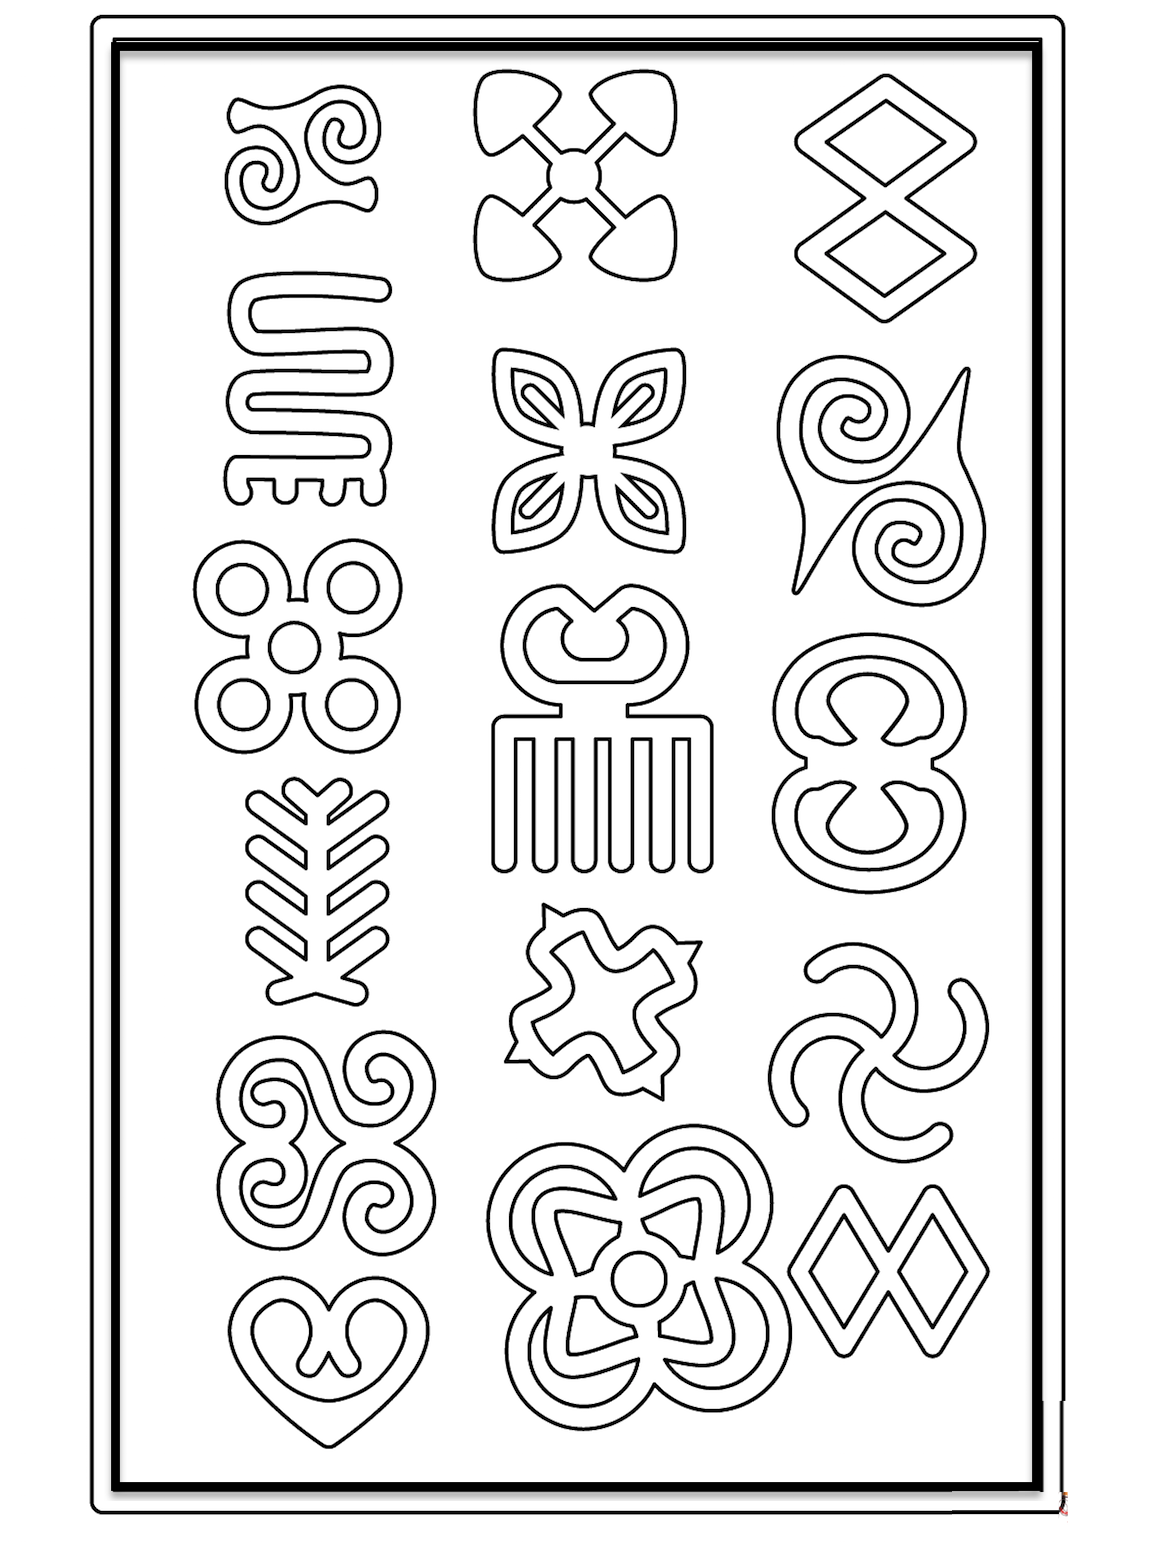 African Symbols, Coloring Pages And Other Free Printable.